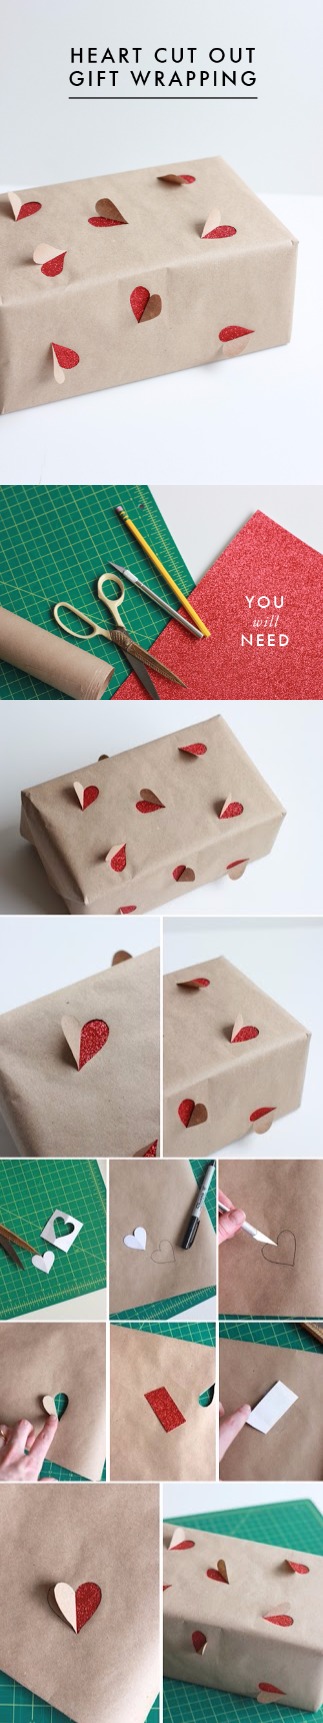 4-sweet-gift-wrapping-ideas-for-valentines-day